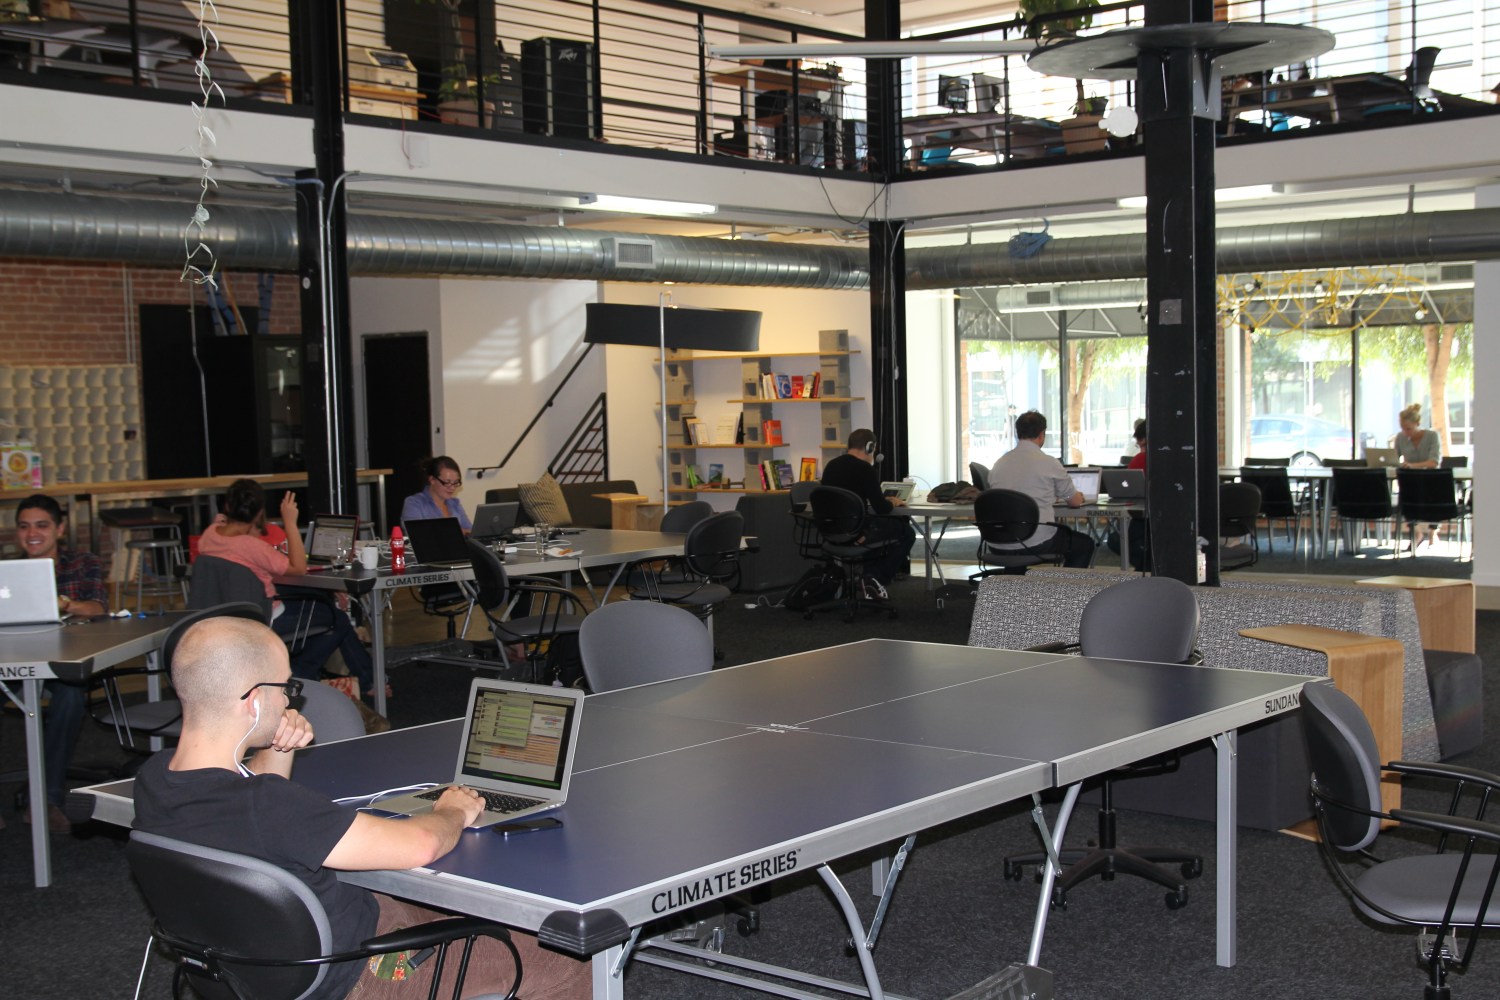 WIKIMEDIA/Msingularian-Open office space with man sitting with a laptop at a ping pong table, October 1, 2012.